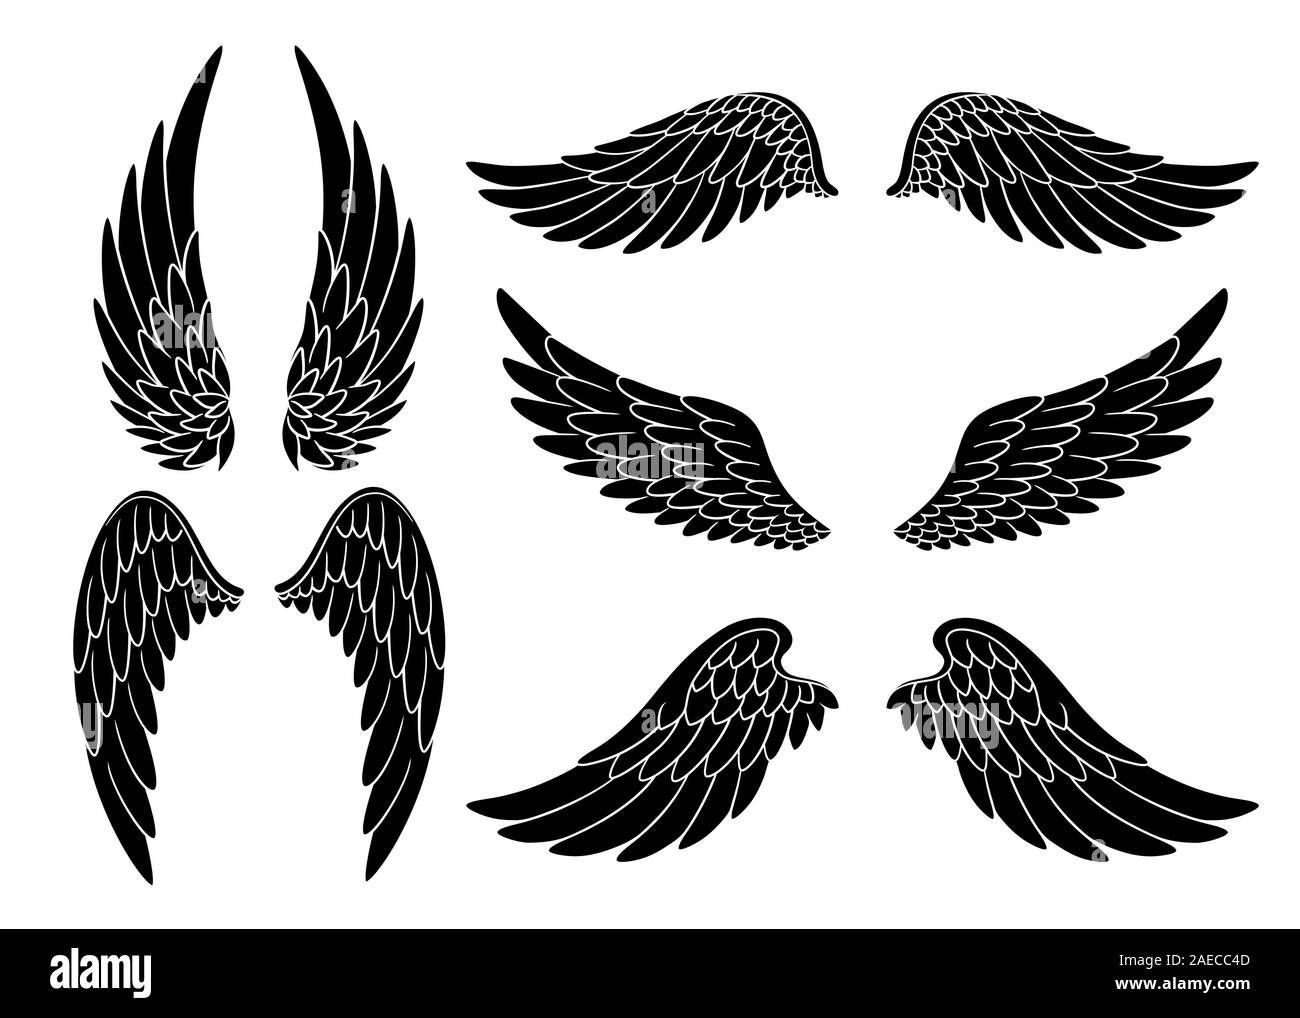 Set of hand drawn bird or angel wings of different shape in open position. Black doodle wings set Stock Vector